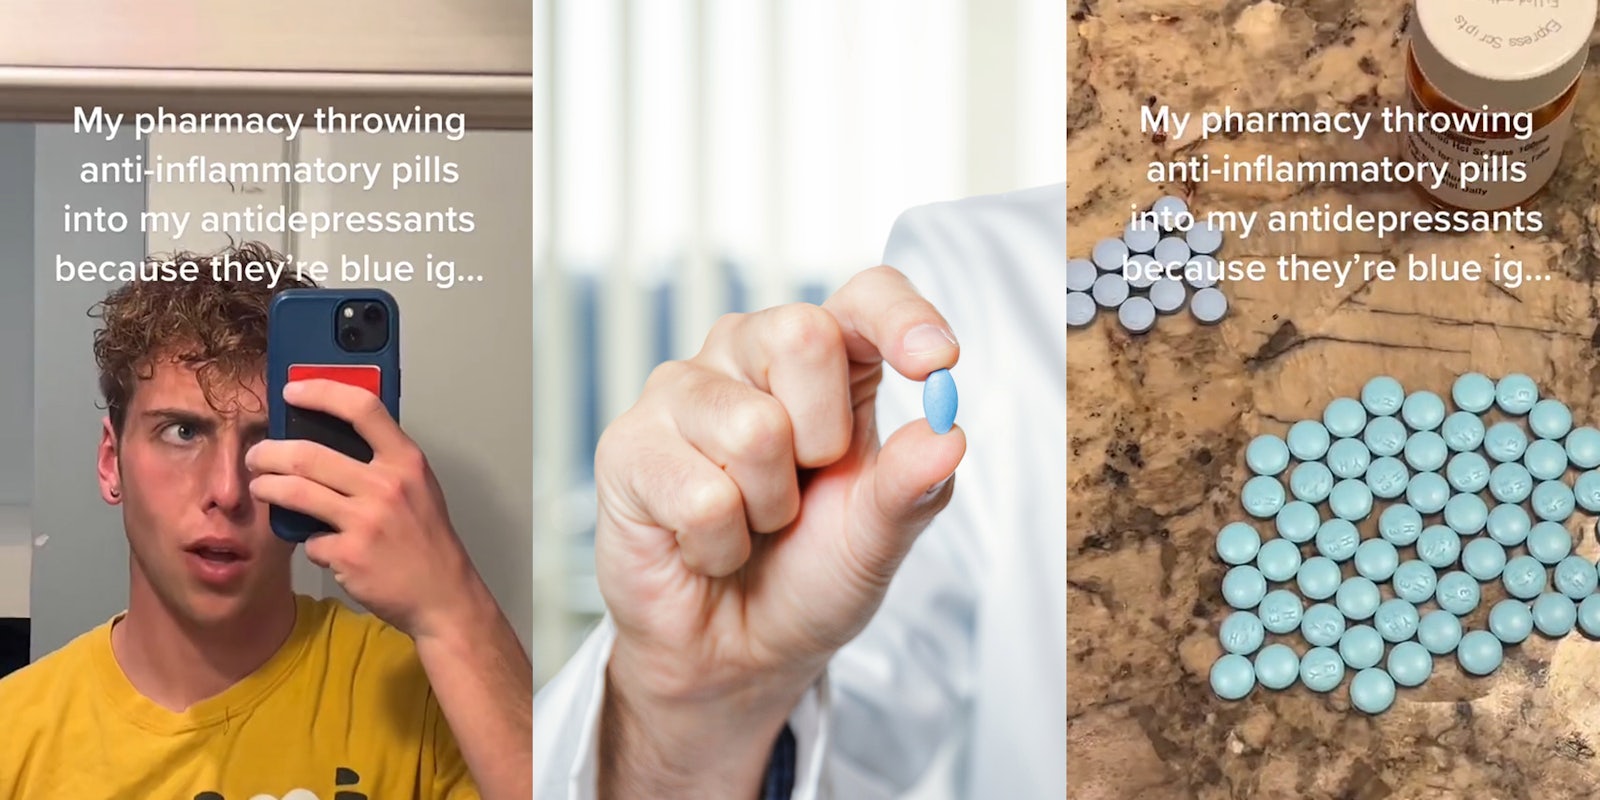 person speaking in mirror with caption 'My pharmacy throwing anti-inflammatory pills into my antidepressants because they're blue ig...' (l) pharmacy tech holding blue pill (c) blue pills on counter with caption with caption 'My pharmacy throwing anti-inflammatory pills into my antidepressants because they're blue ig...' (r)